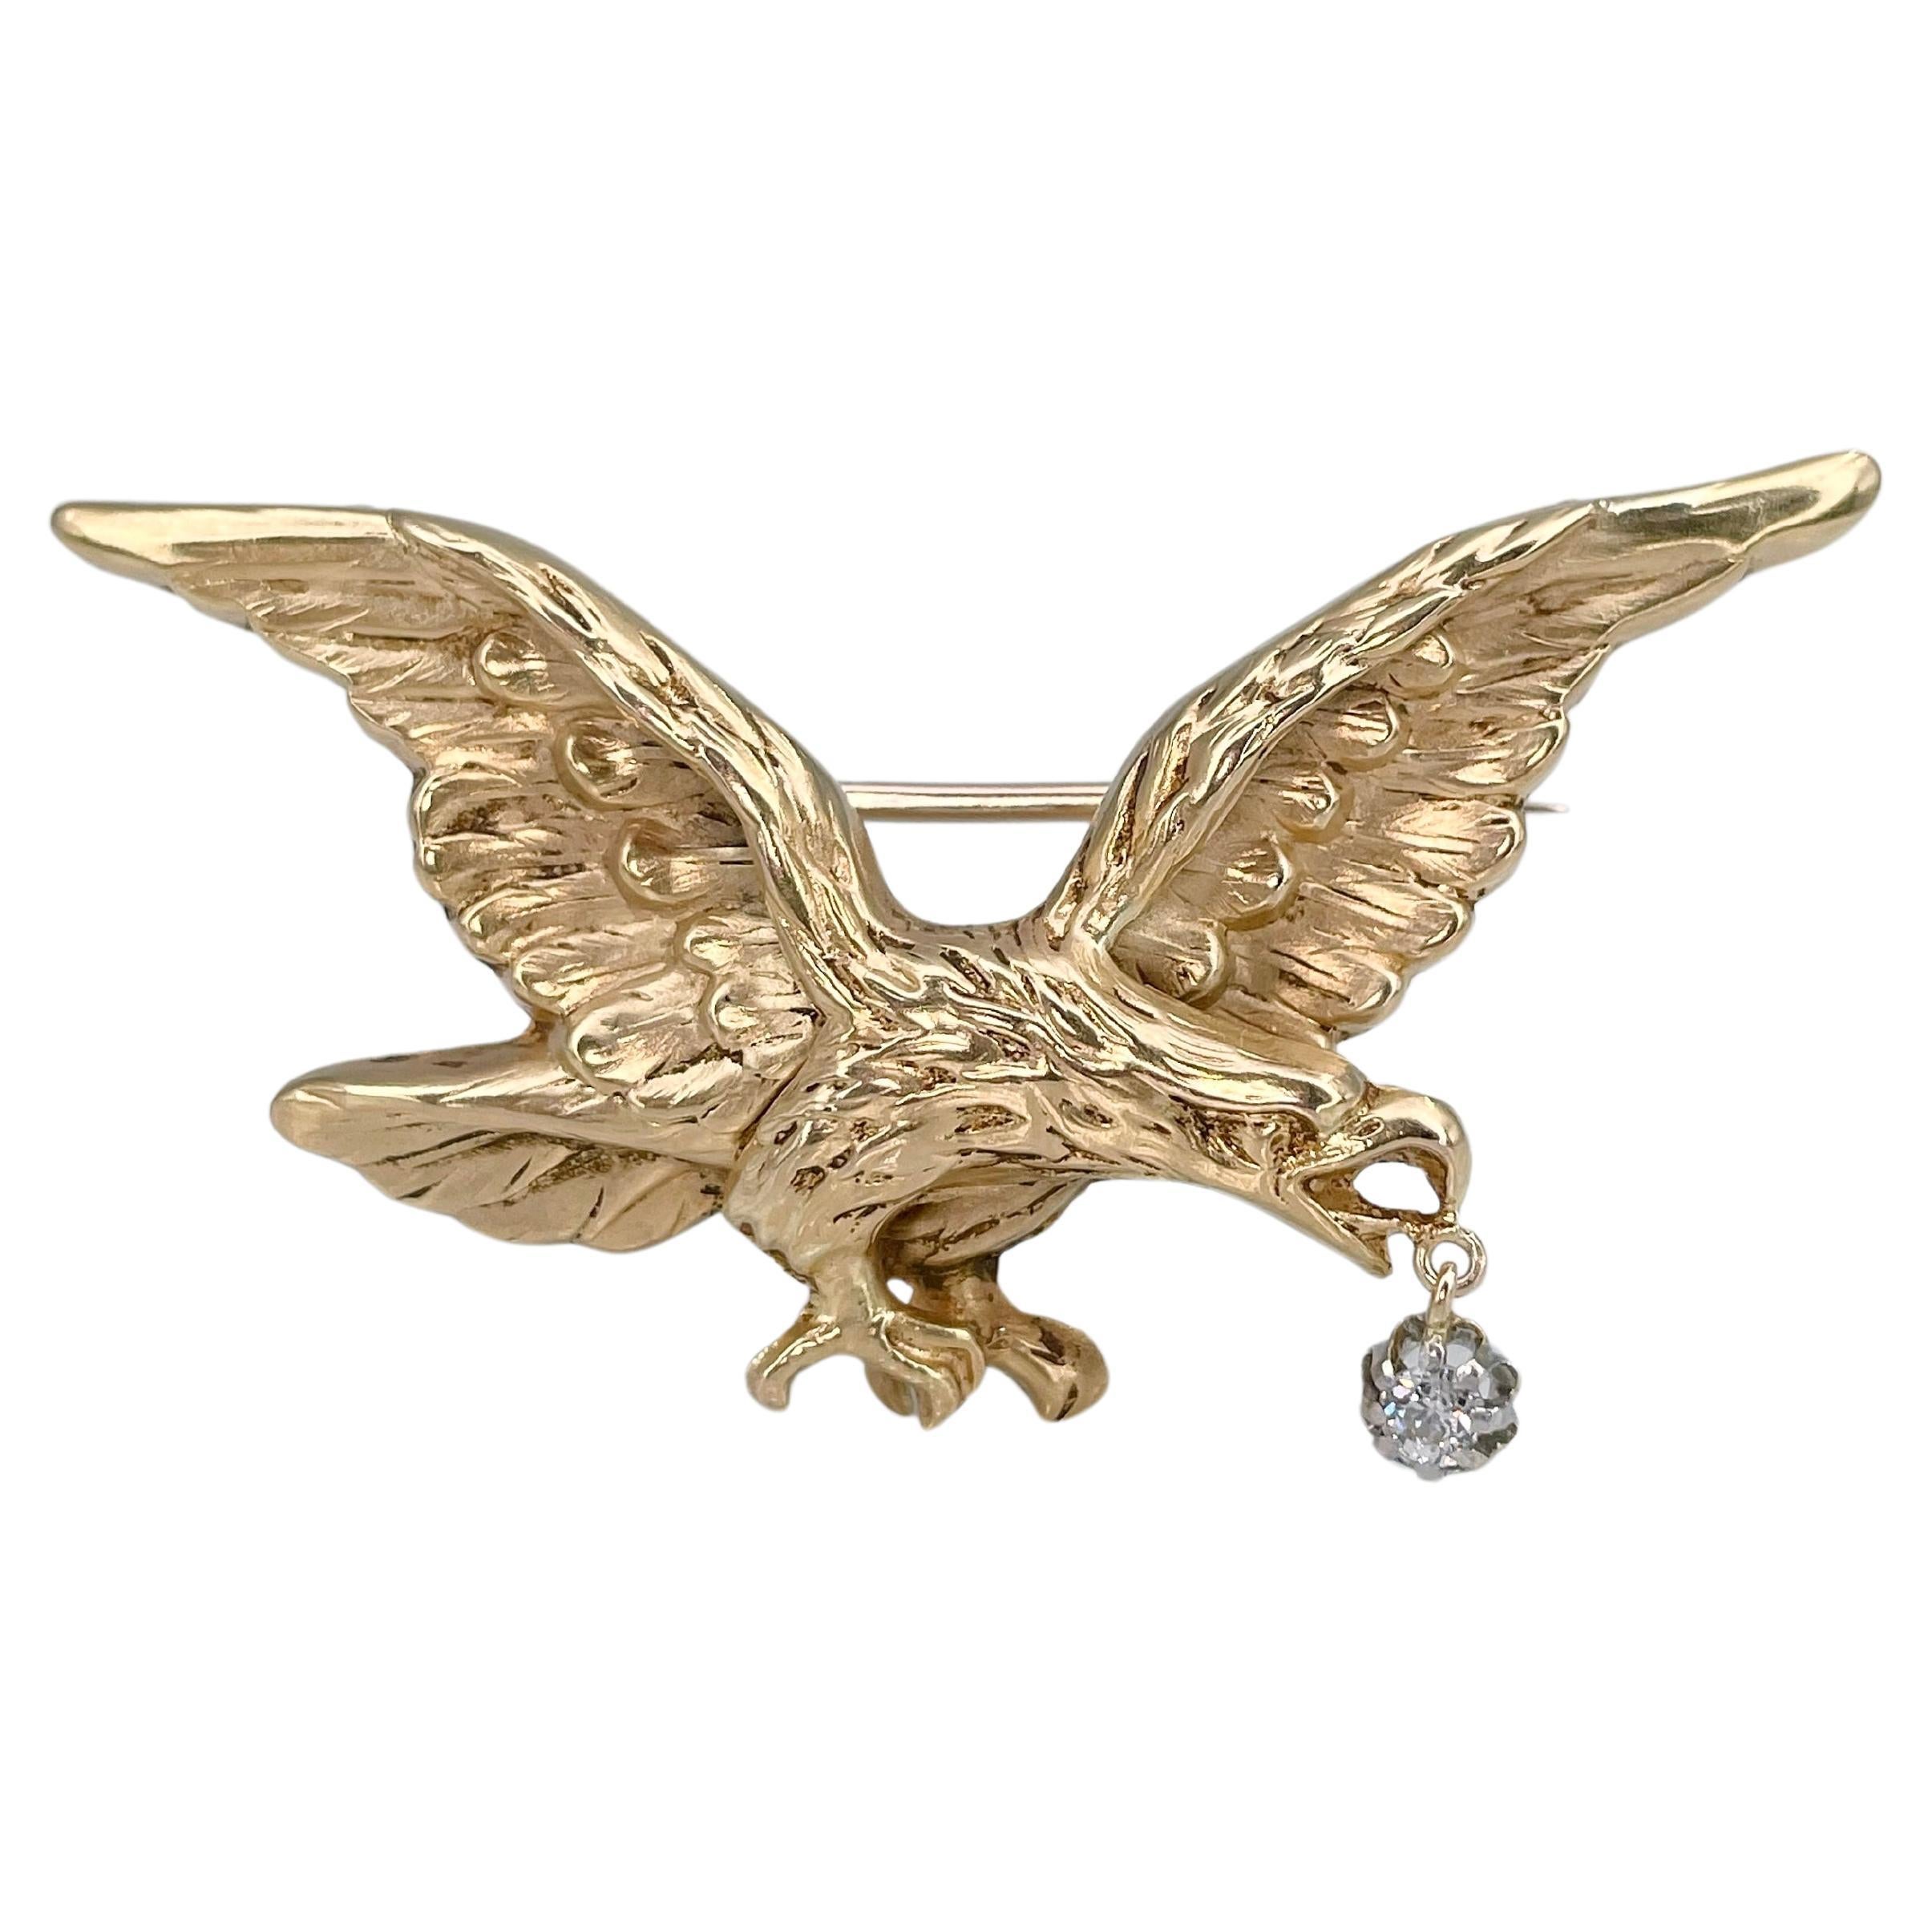 Victorian 18 Karat Yellow Gold Eagle Holding Old Cut Diamond Pin Brooch Necklace For Sale